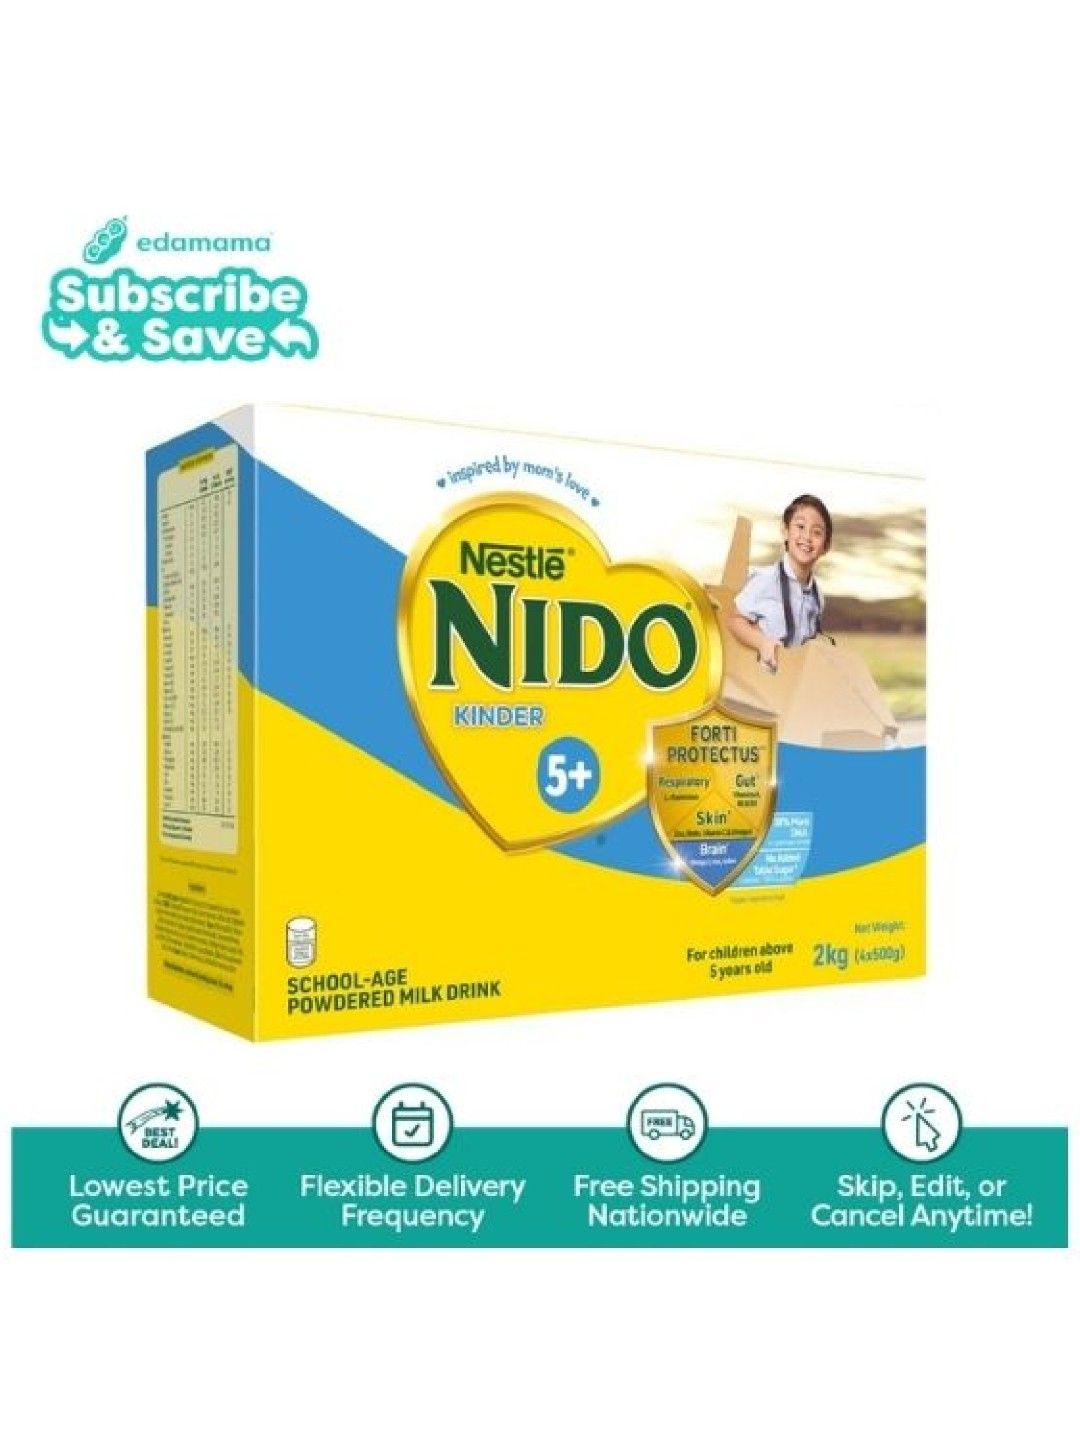 Nido 5+ Powdered Milk Drink For School Age Children Above 5 Years Old 2kg - Subscription